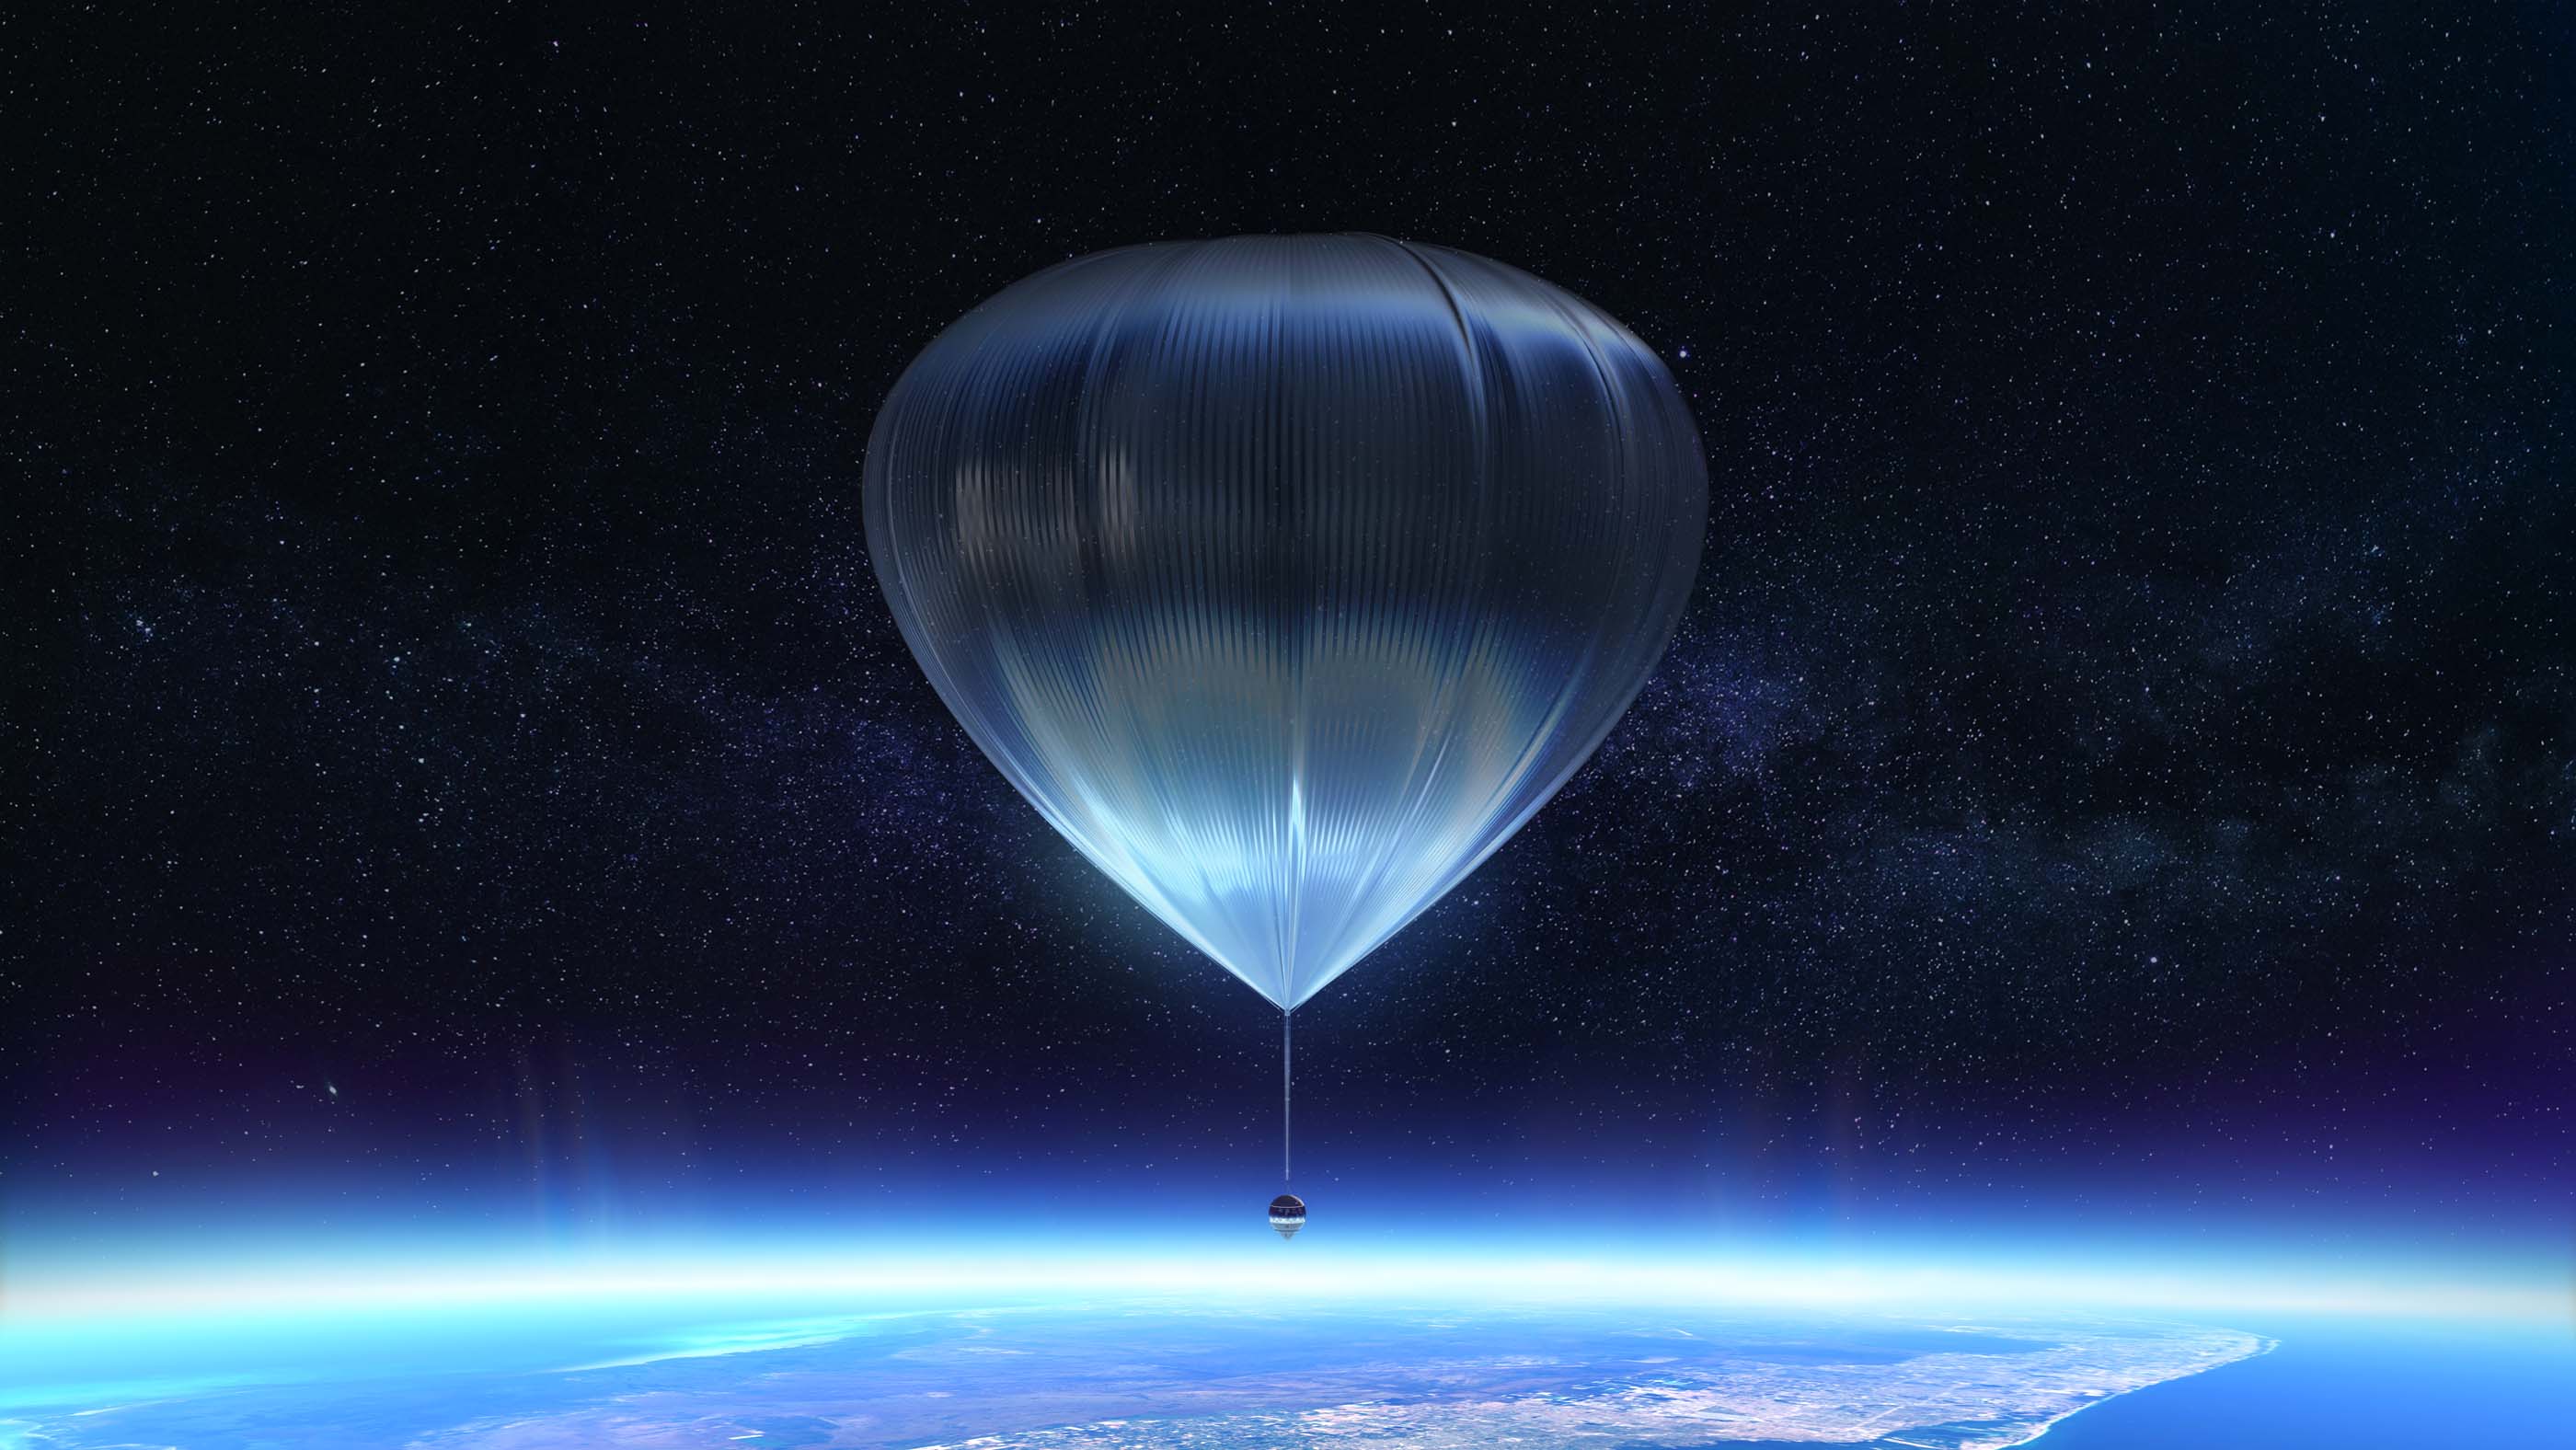 large balloon lifts spacecraft above earth surface